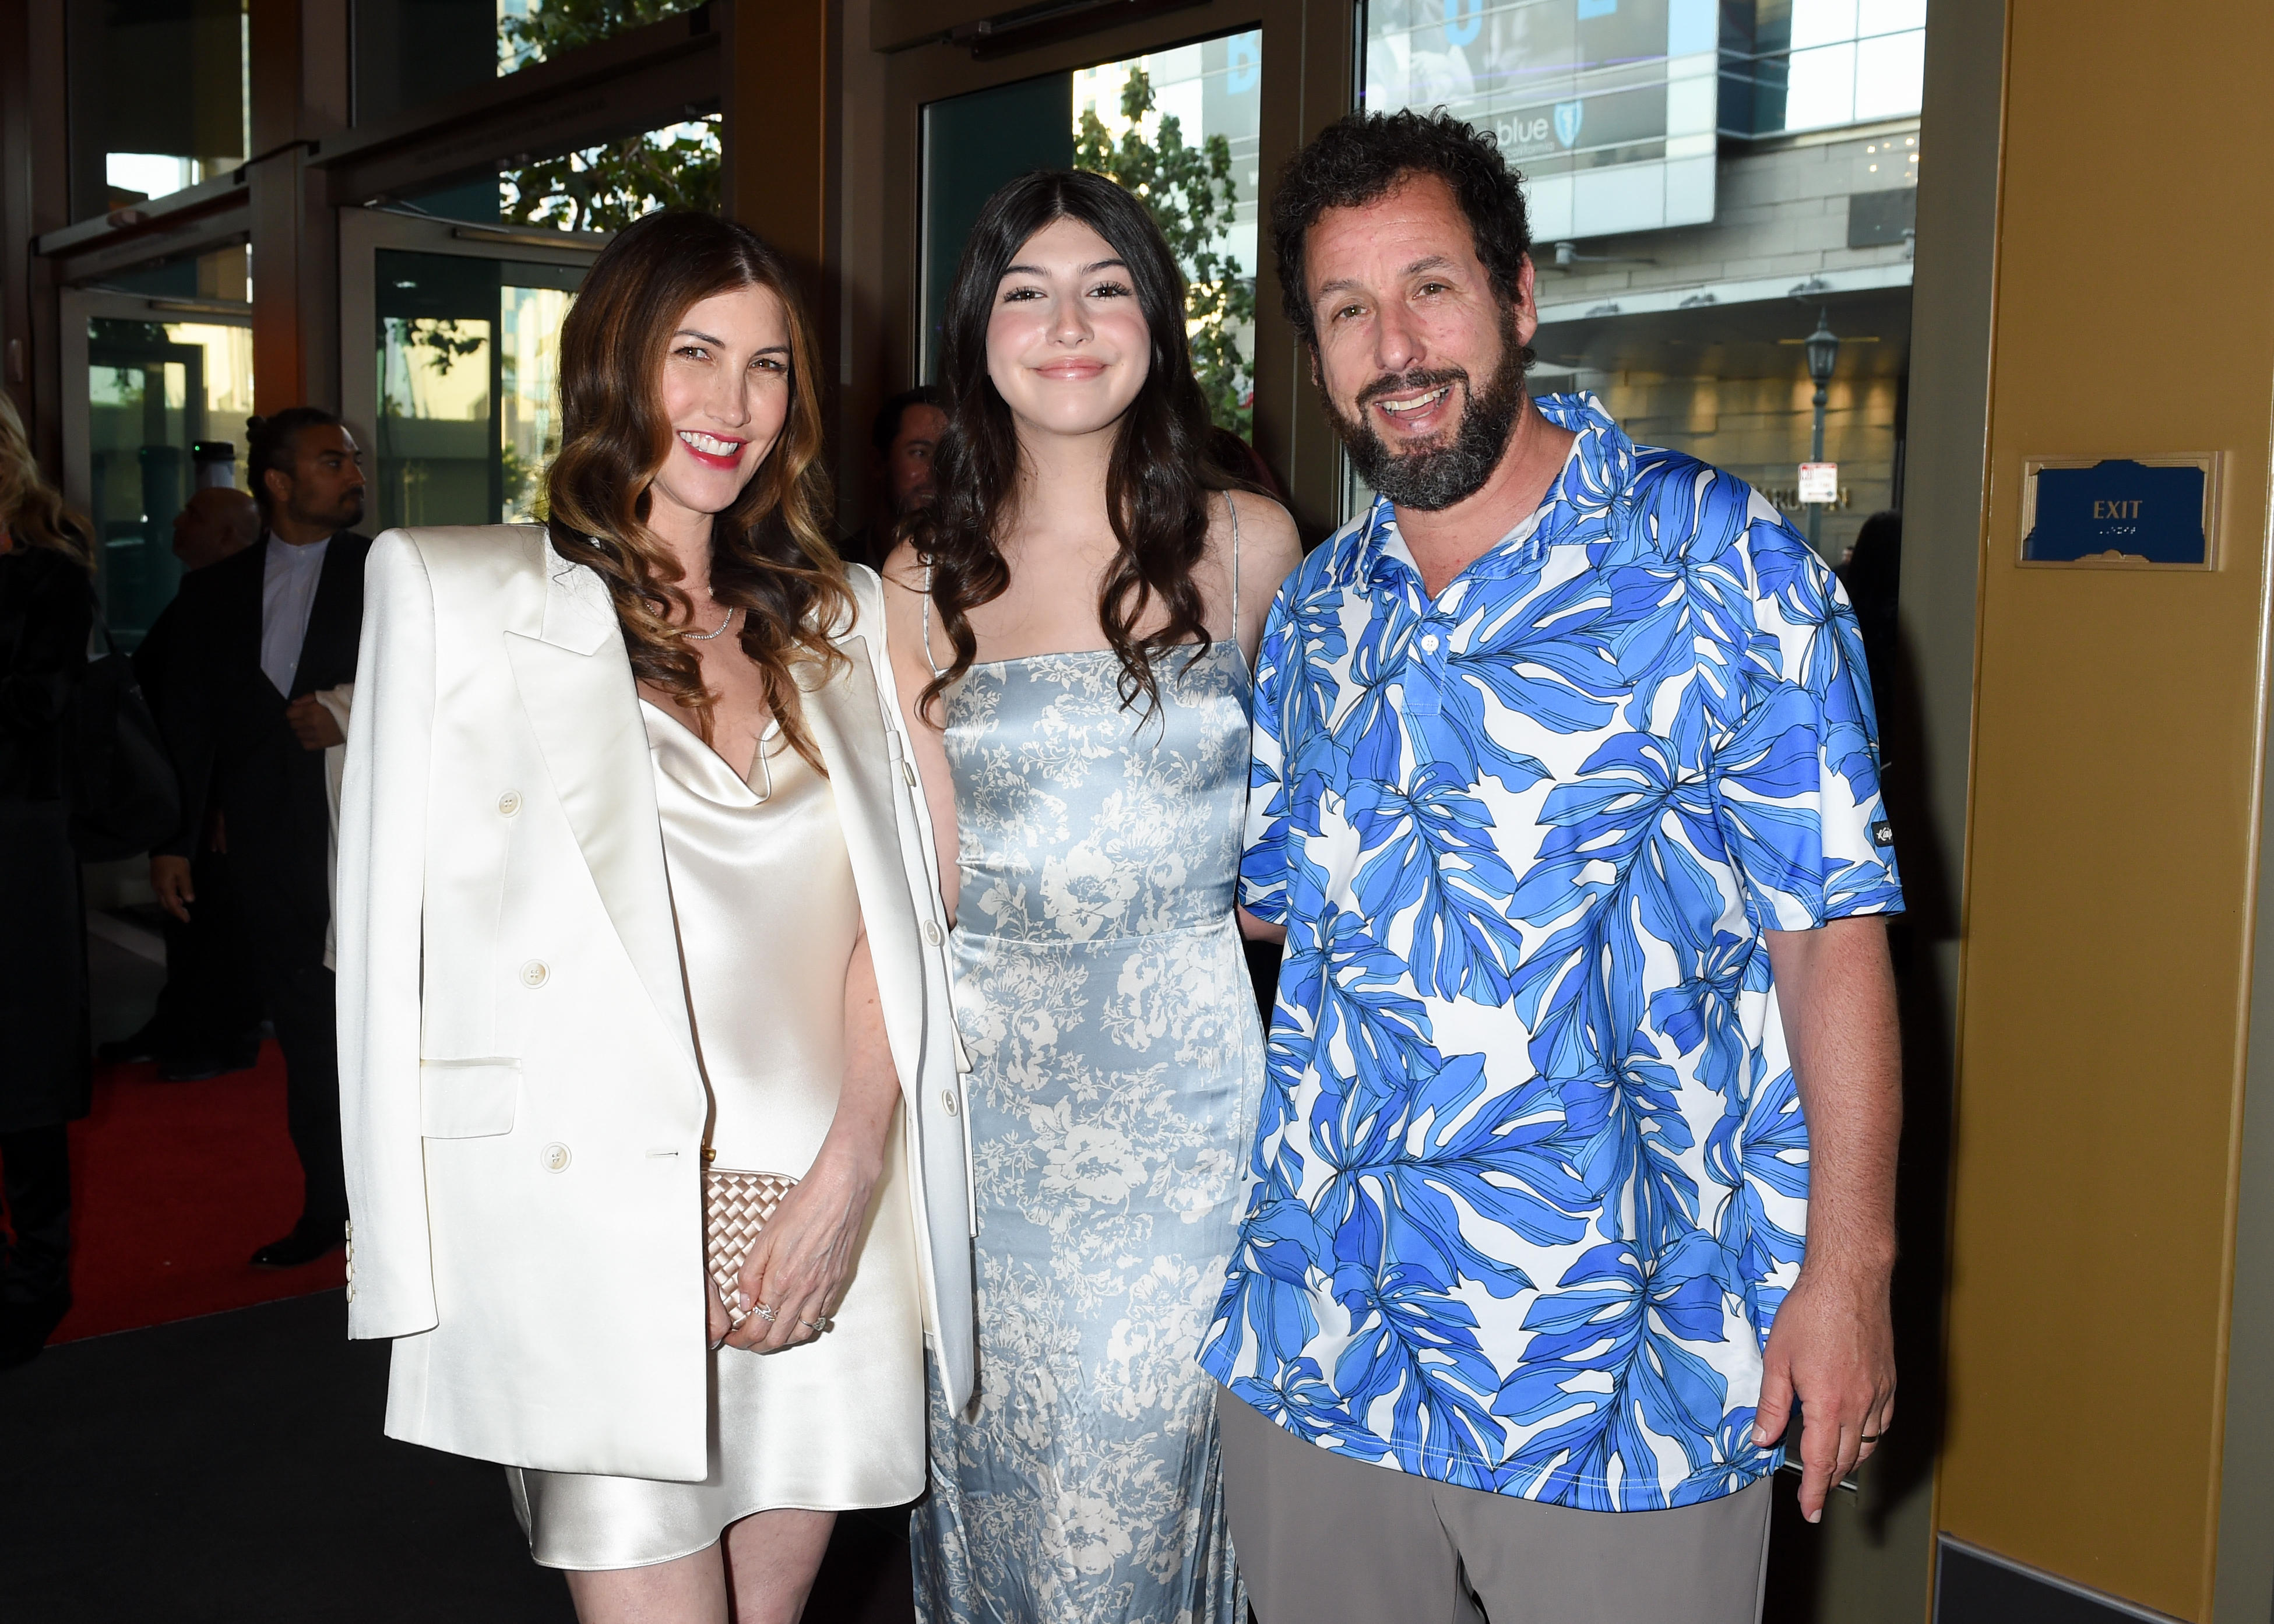 Jackie Sandler, Sunny Sandler and Adam Sandler at the premiere of "The Out-Laws" held at Regal L.A. Live on, June 26, 2023, in Los Angeles, California. | Source: Getty Images